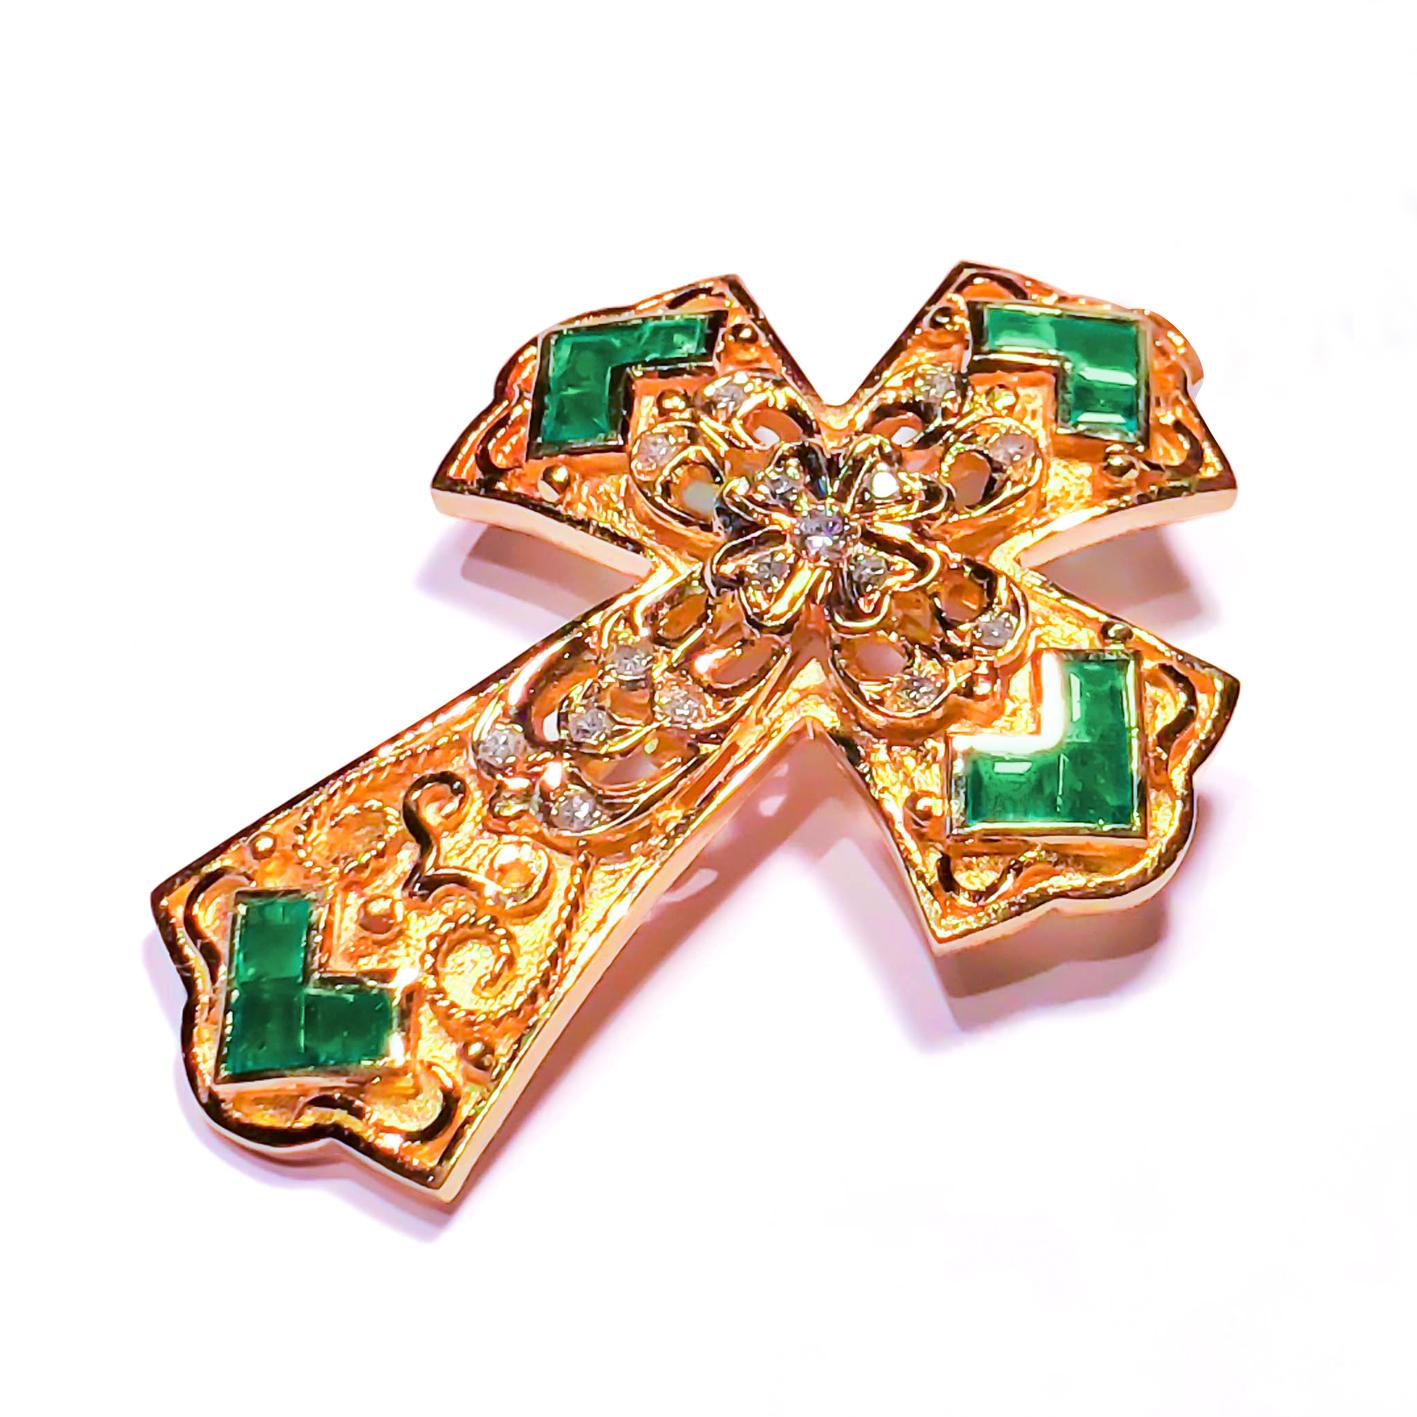 S.Georgios Designer Cross is handmade from solid 18 Karat Yellow Gold and has Granulation work and a beautiful matt finish. It features Diamond's total weight of 0,24 Carats and Emerald's total weight of 2,00 Carats. This art piece is made as an